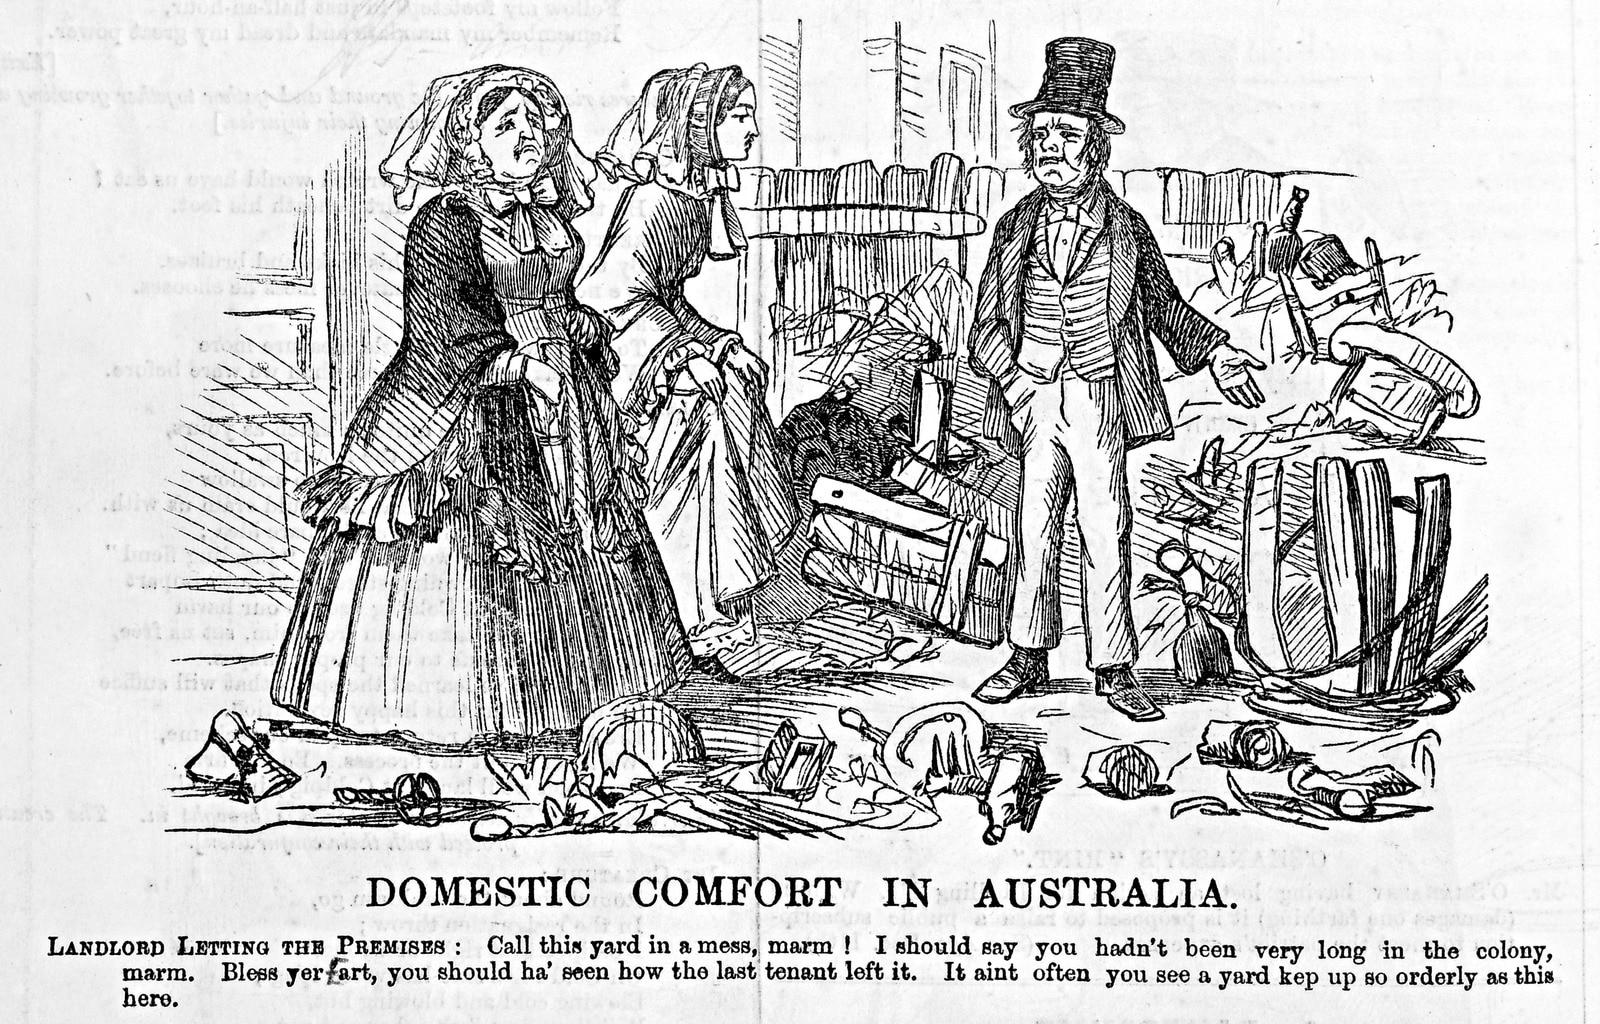 A cartoon showing two women disgusted at rubbish in a backyard.